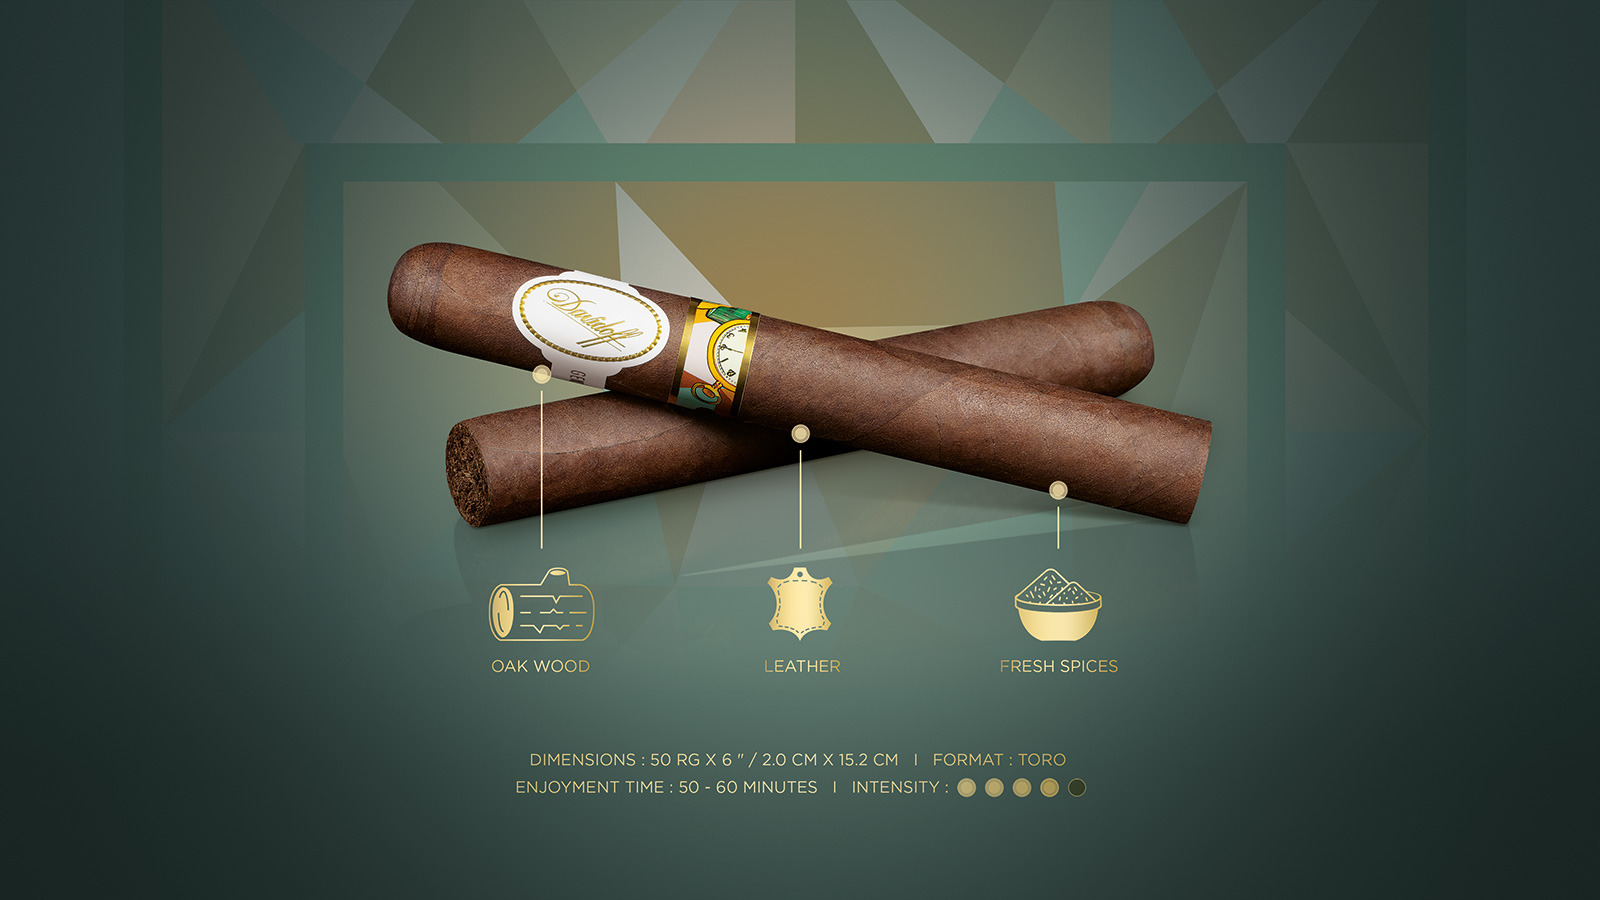 Two toro cigars which come with the Davidoff & Boyarde Masterpiece Humidor Geometrically Speaking with blend details displayed, such as main aromas, enjoyment time and intensity.